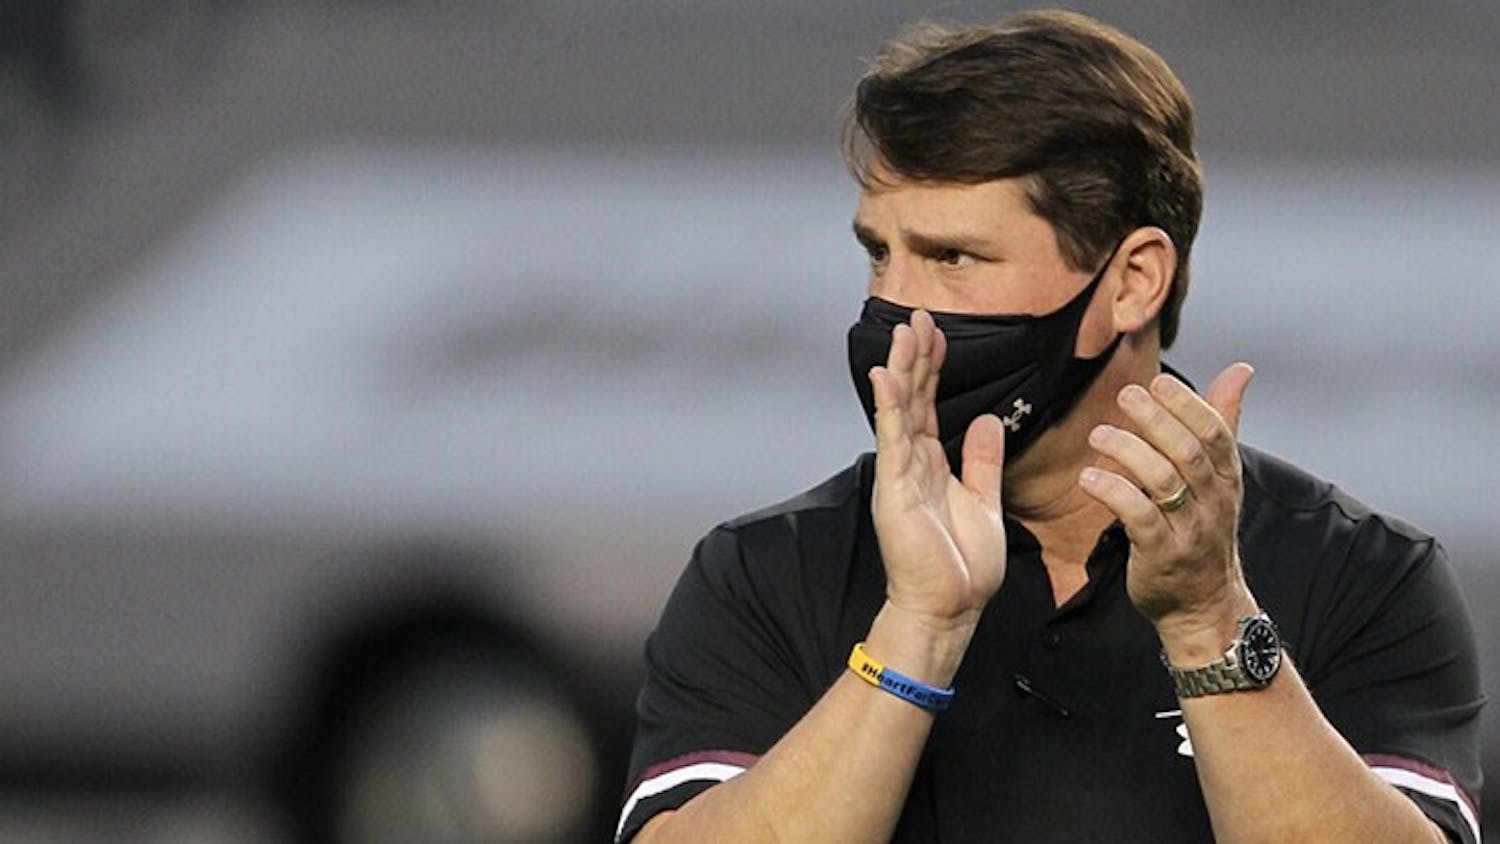 University of South Carolina football head coach Will Muschamp claps while walking down the sideline of the football game against the Tennessee Volunteers.